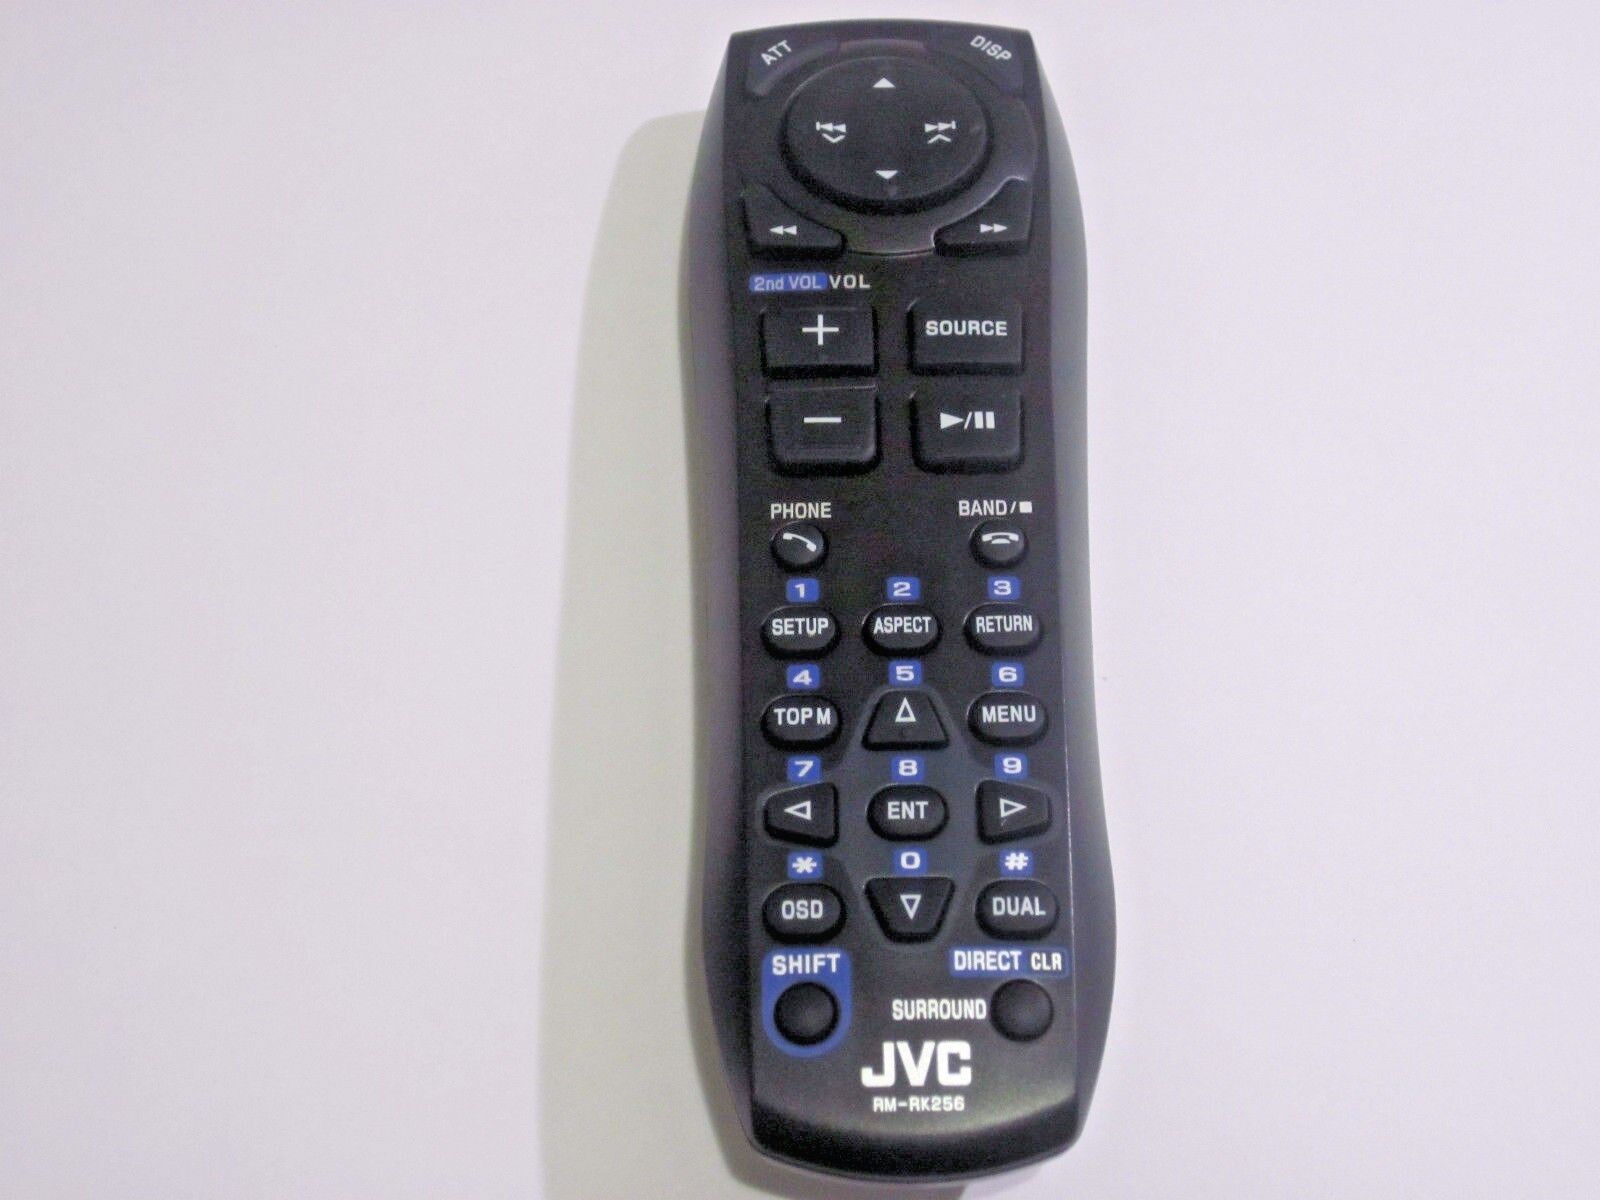 ORIGINAL JVC RM-RK256 Branded goods Our shop OFFers the best service REMOTE CONTROL KW-ADV65BT NEW B OEM